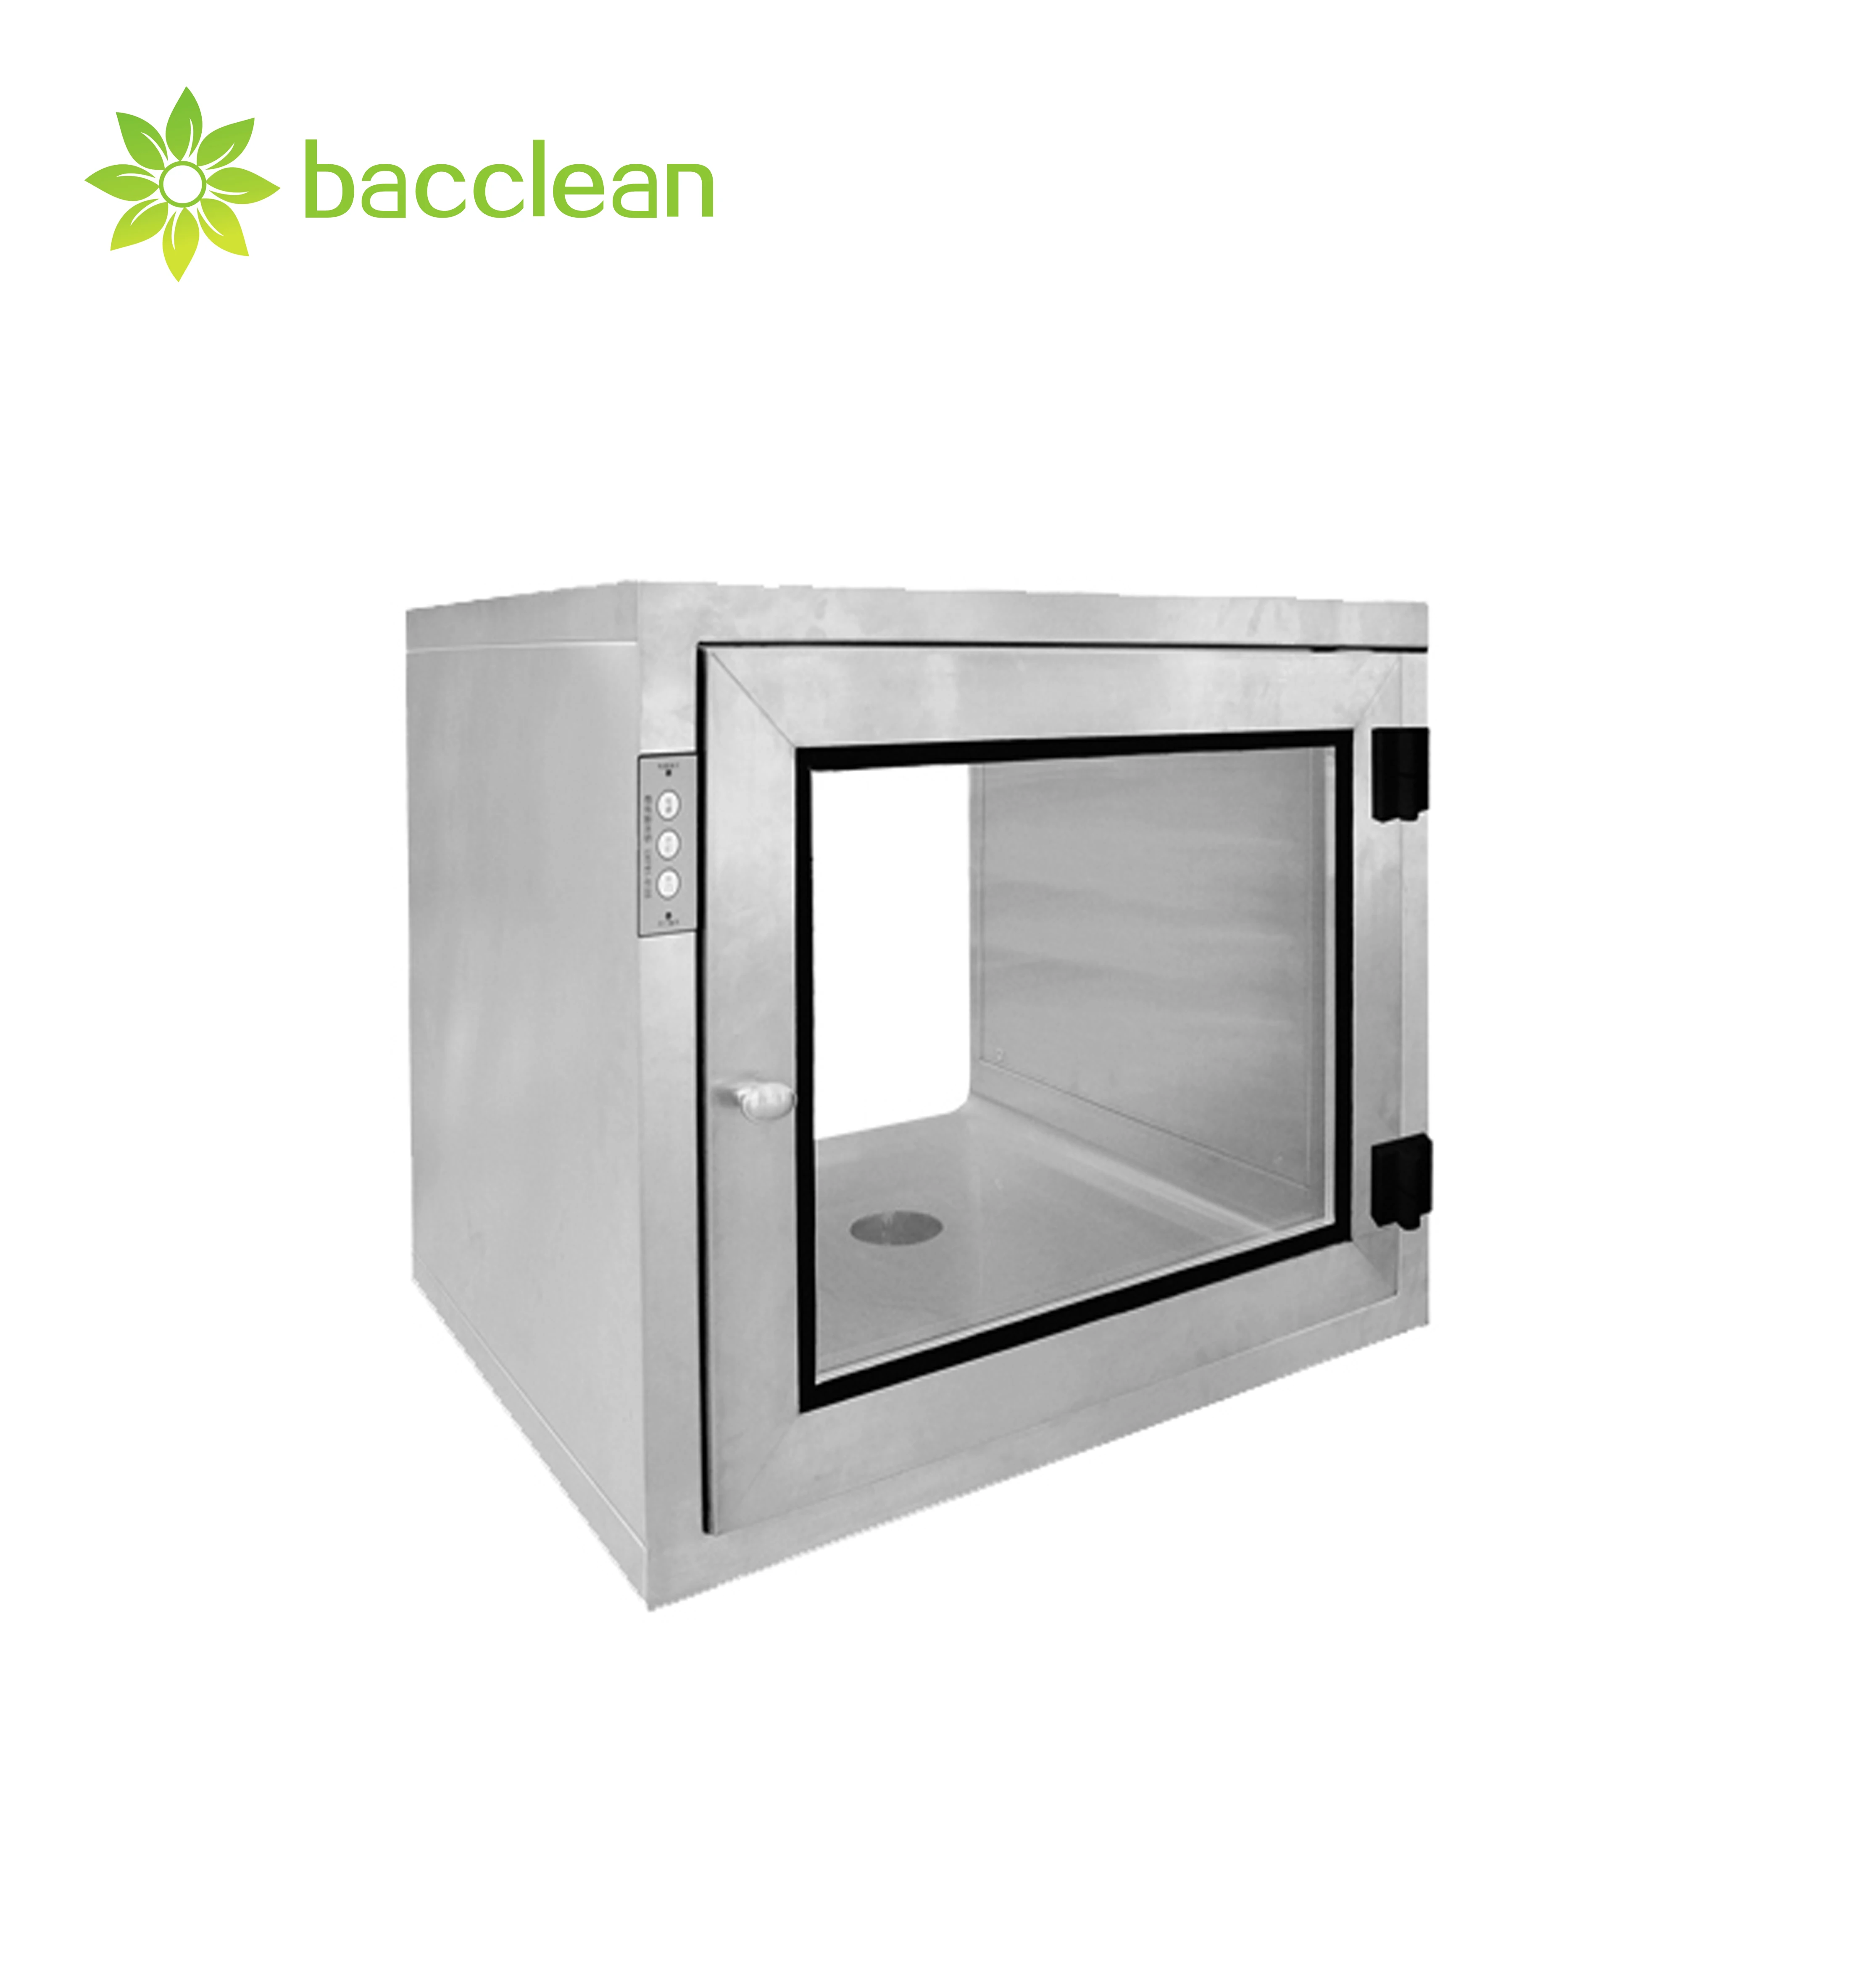 cleanroom Pass box with for hospital and dust free room